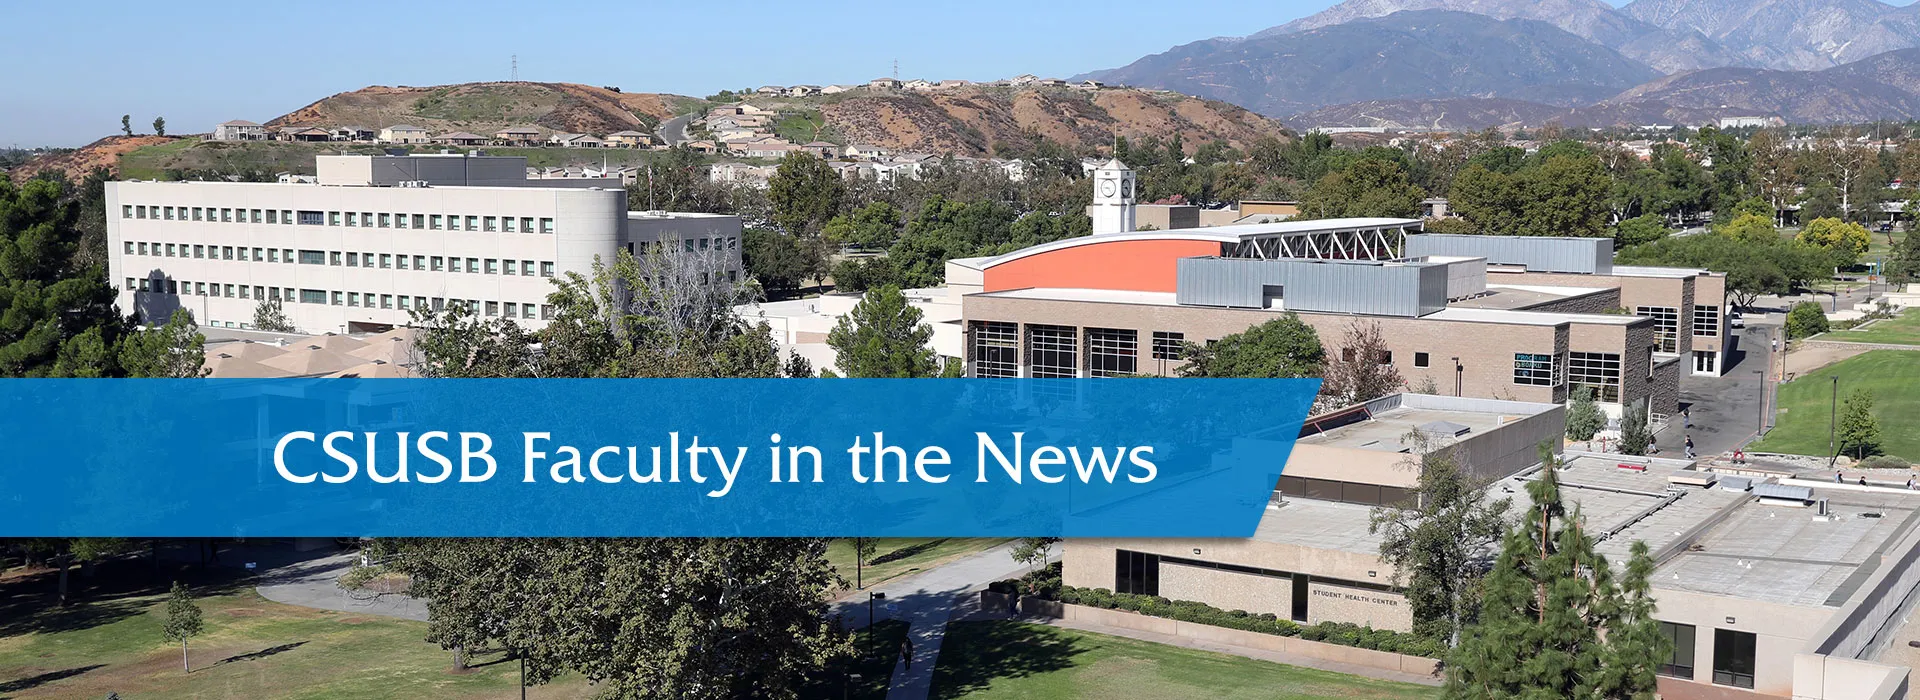 Faculty in the News header